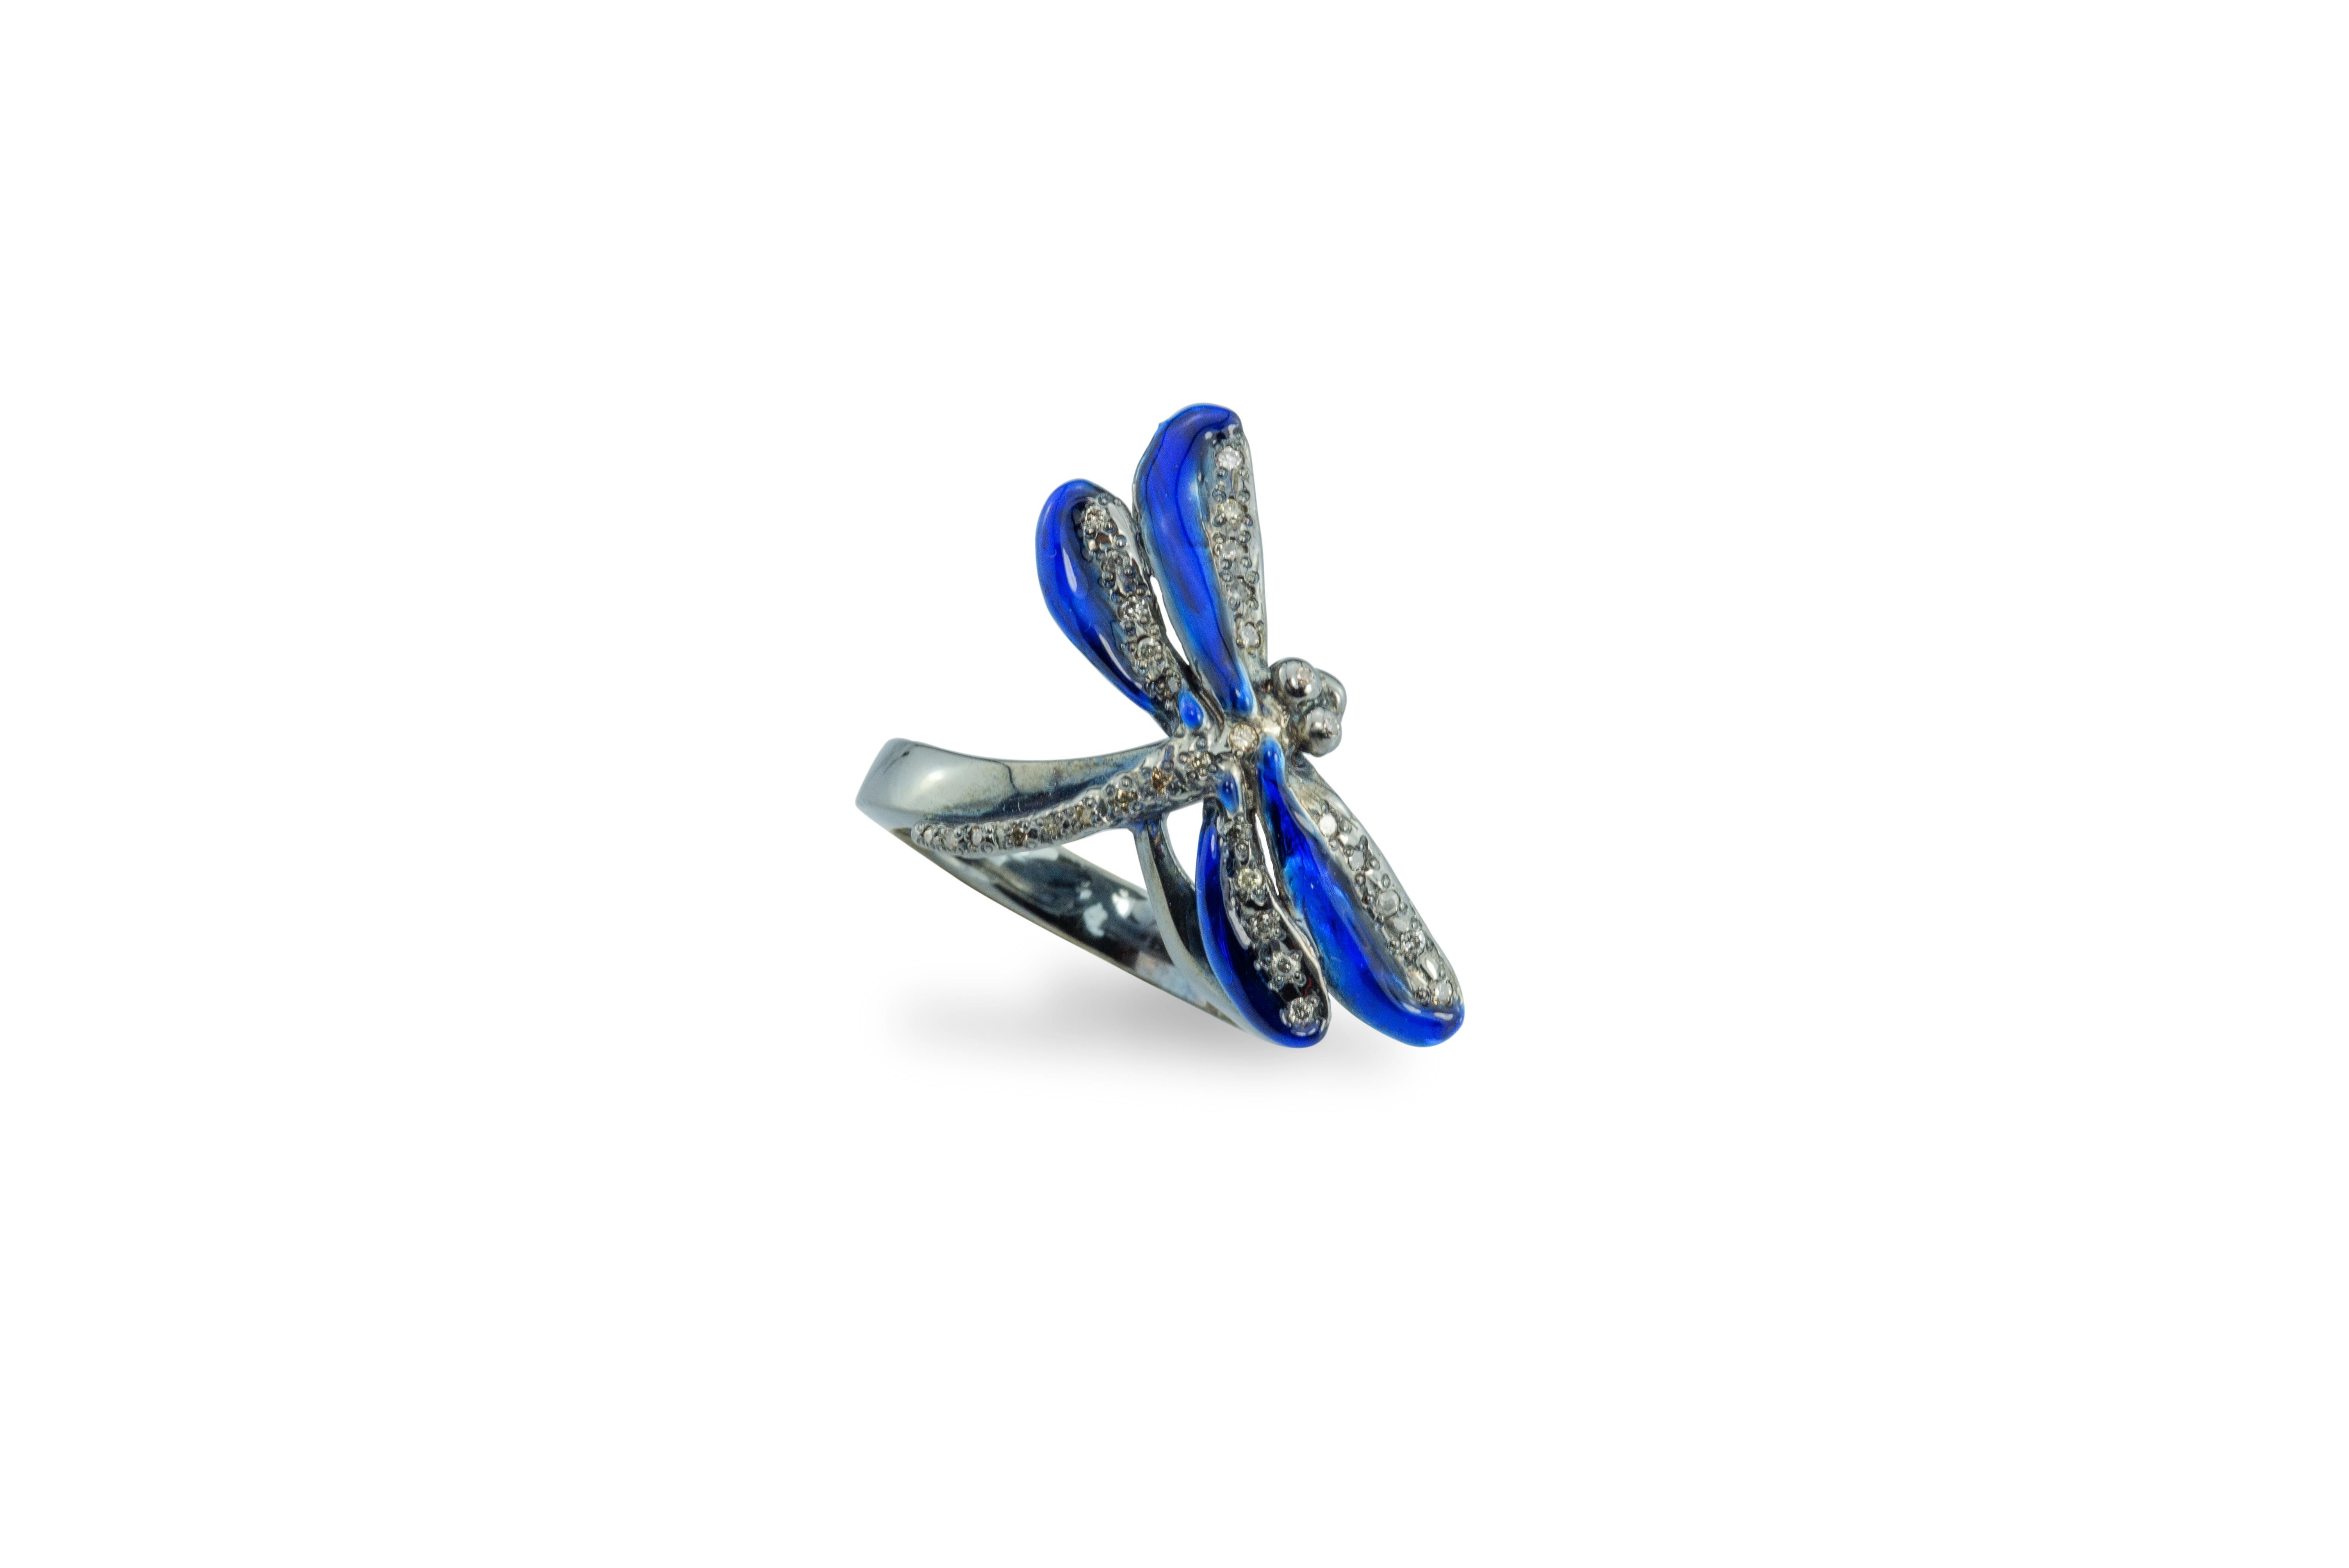 Colorful Enamel Unique Piece Burnished Silver Blue Enameled 0.20 Karat White Diamond Dragonfly Design Ring
Available size: size 14 other sizes available in two weeks
Elegant burnished silver and 0.20 karat white diamonds stones wrapped with enamel,